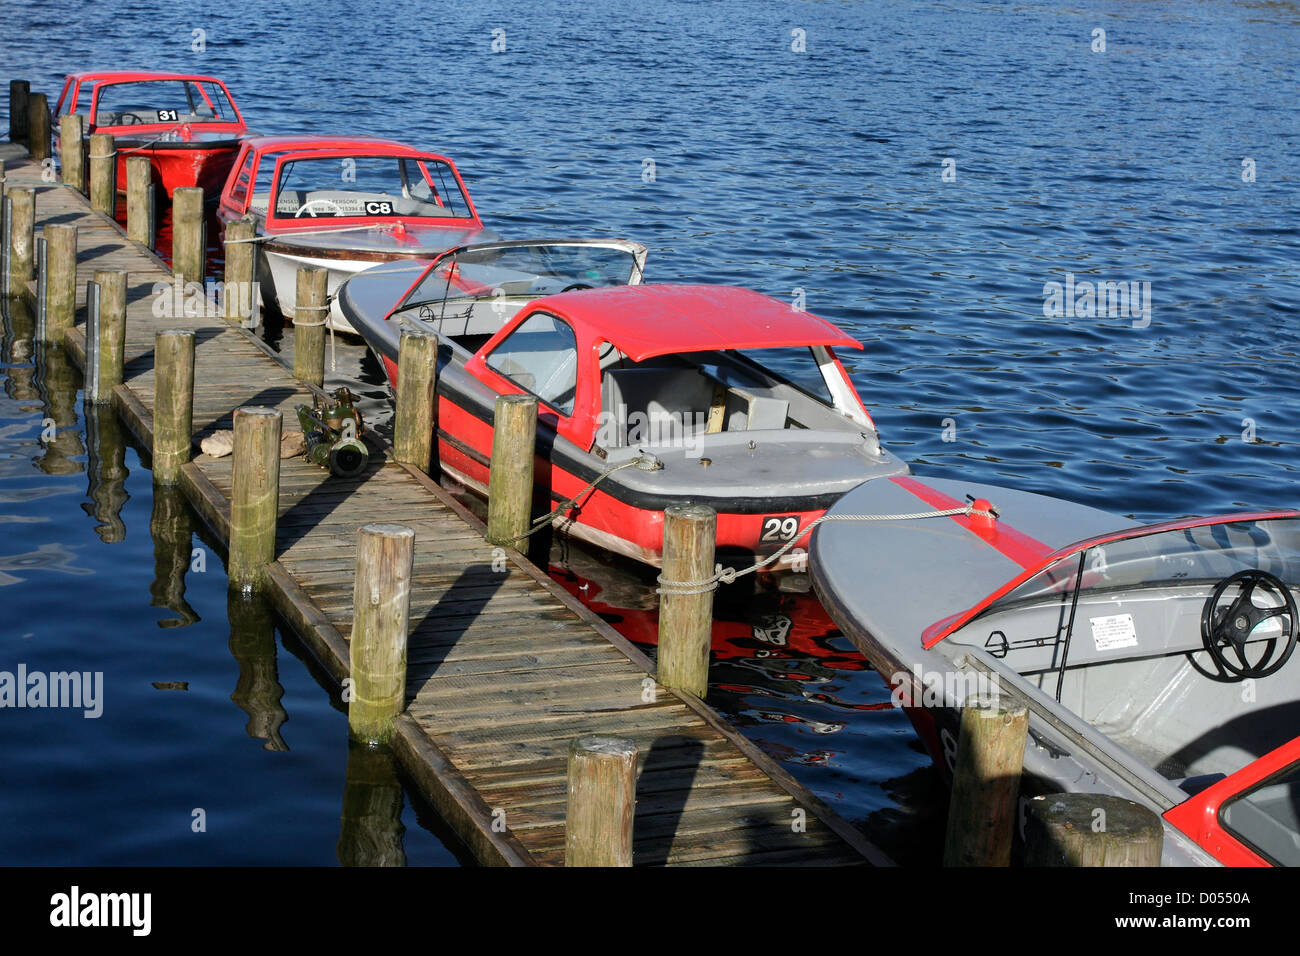 A row of small motor boats (for hire) moored at Bowness on the shores of Lake Windermere, Cumbria, England. Stock Photo